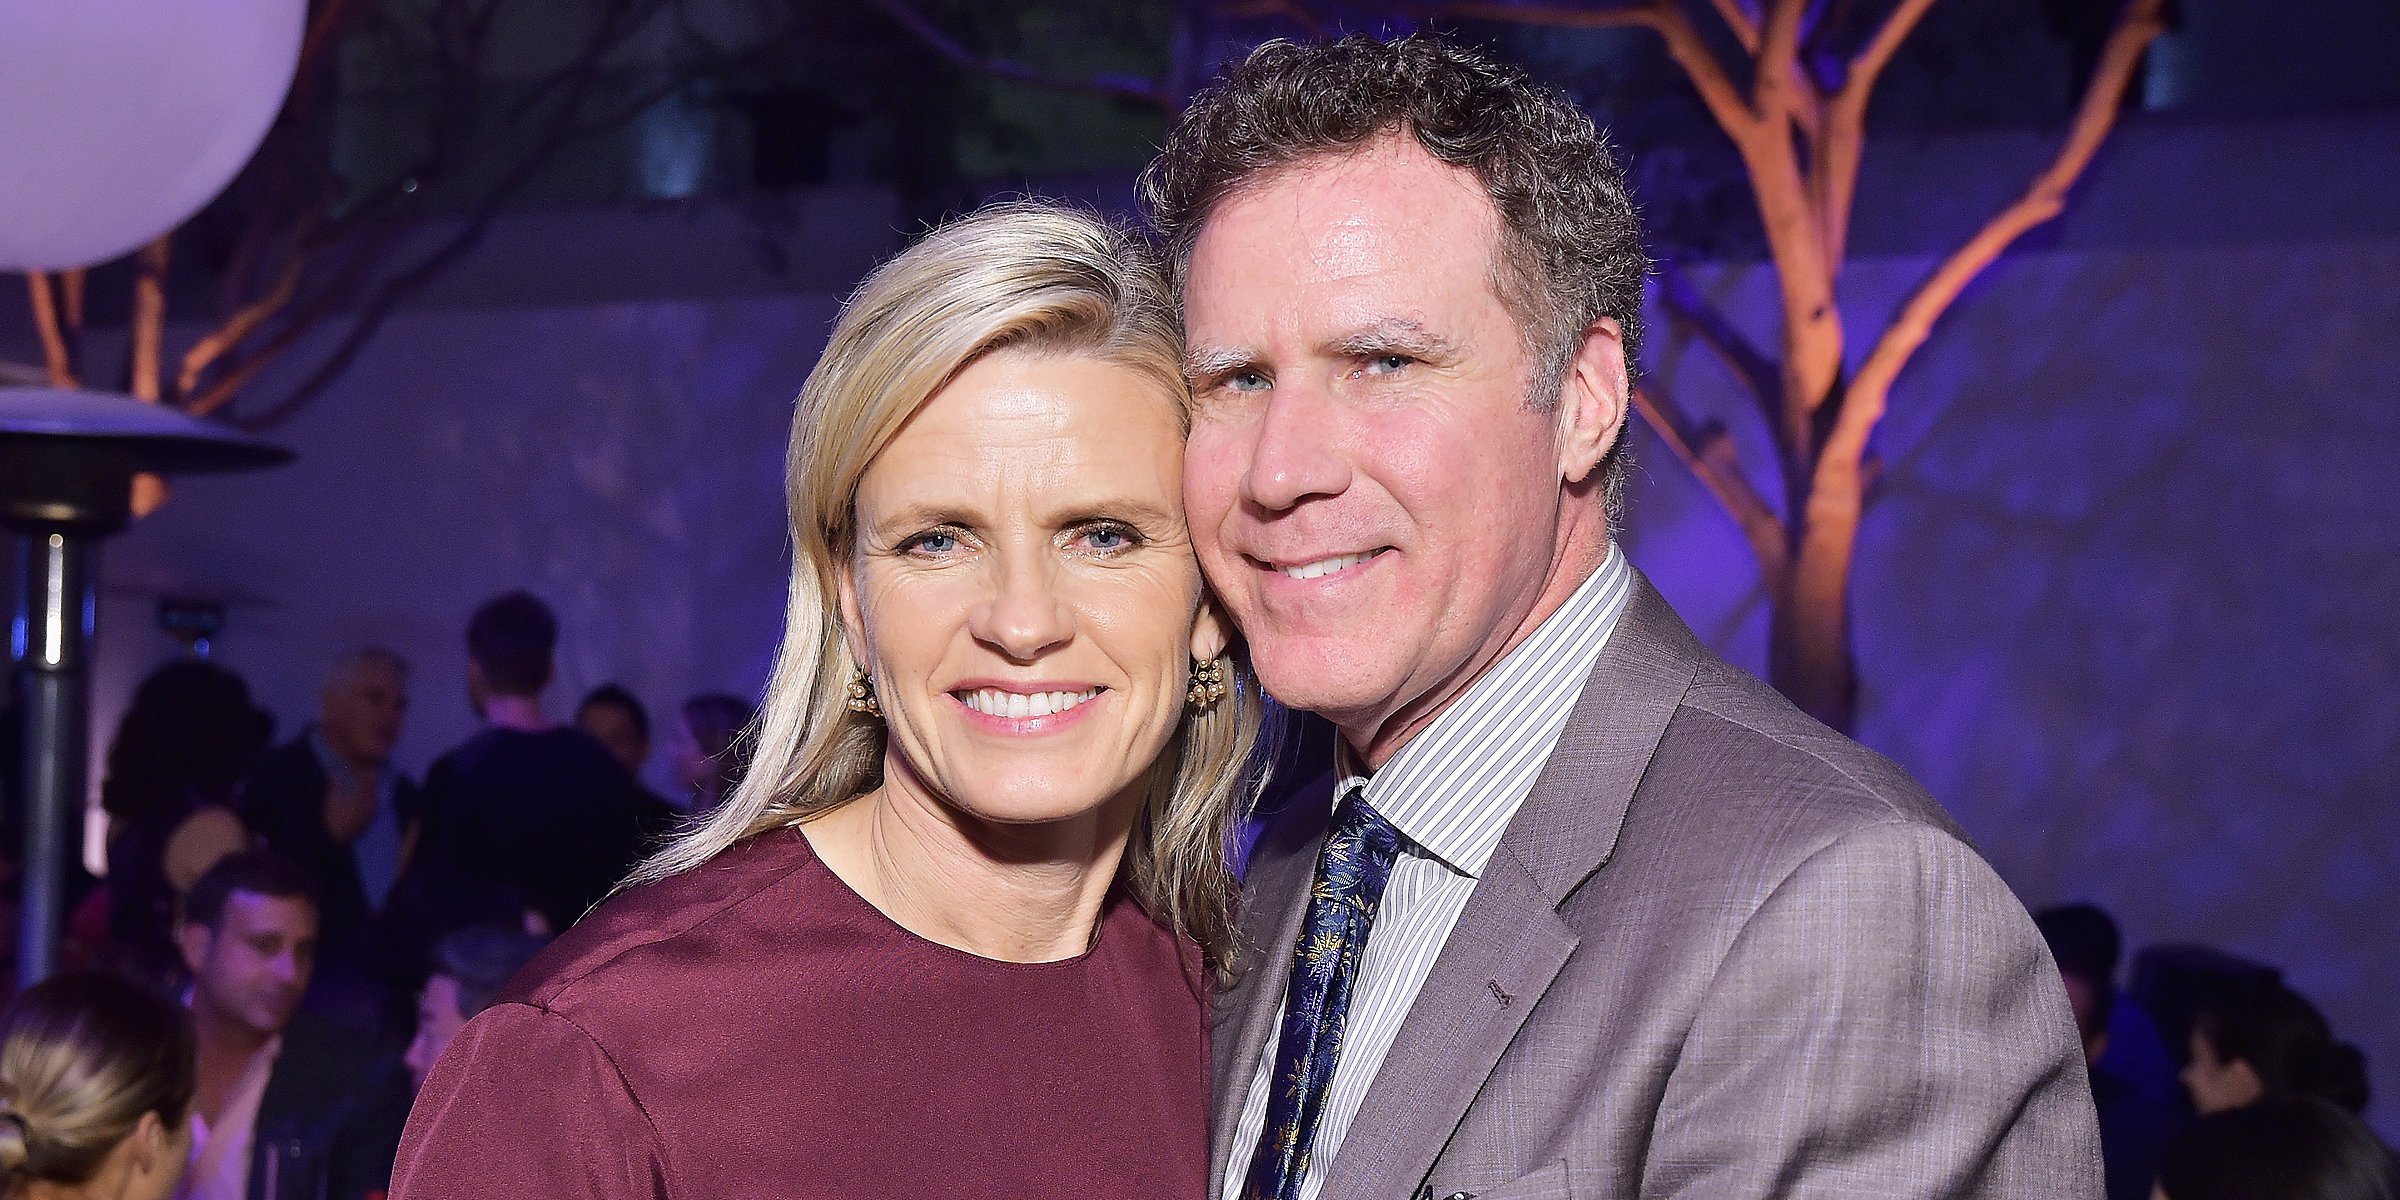 Will Ferrell and Viveca Paulin | Source: Getty Images